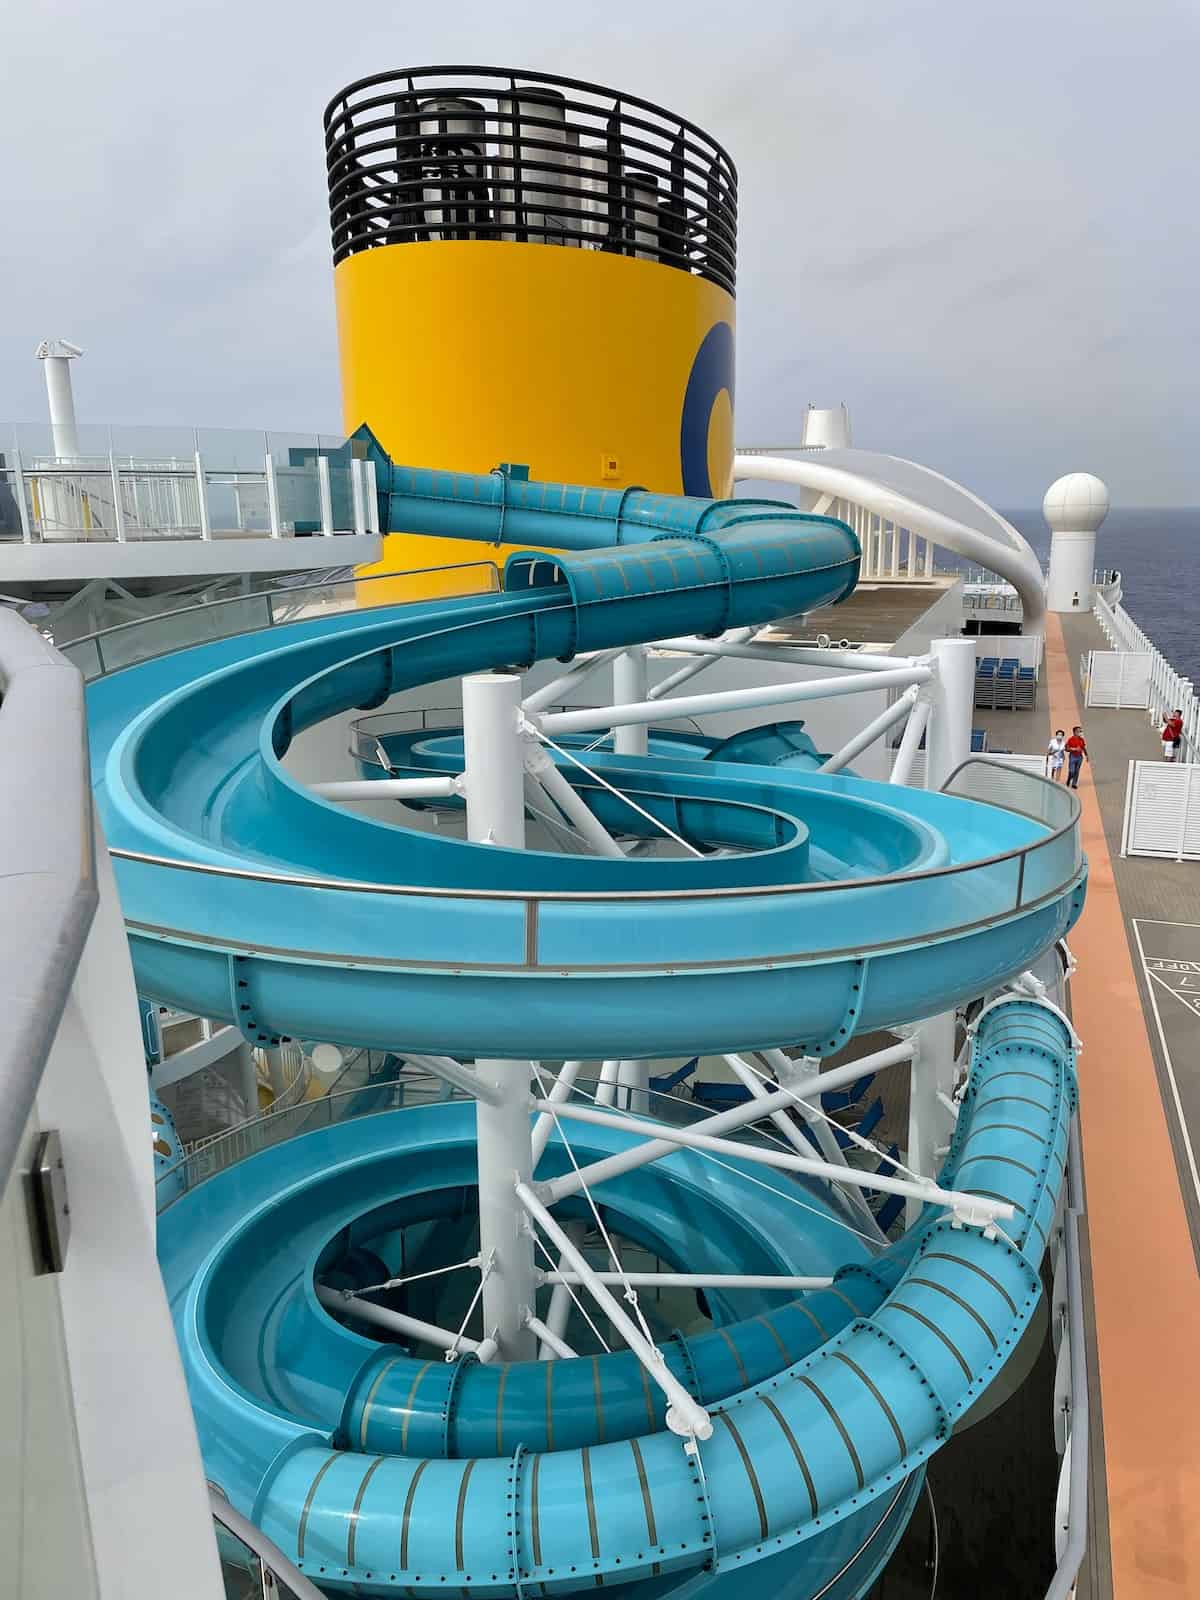 Water slide on a cruise ship.